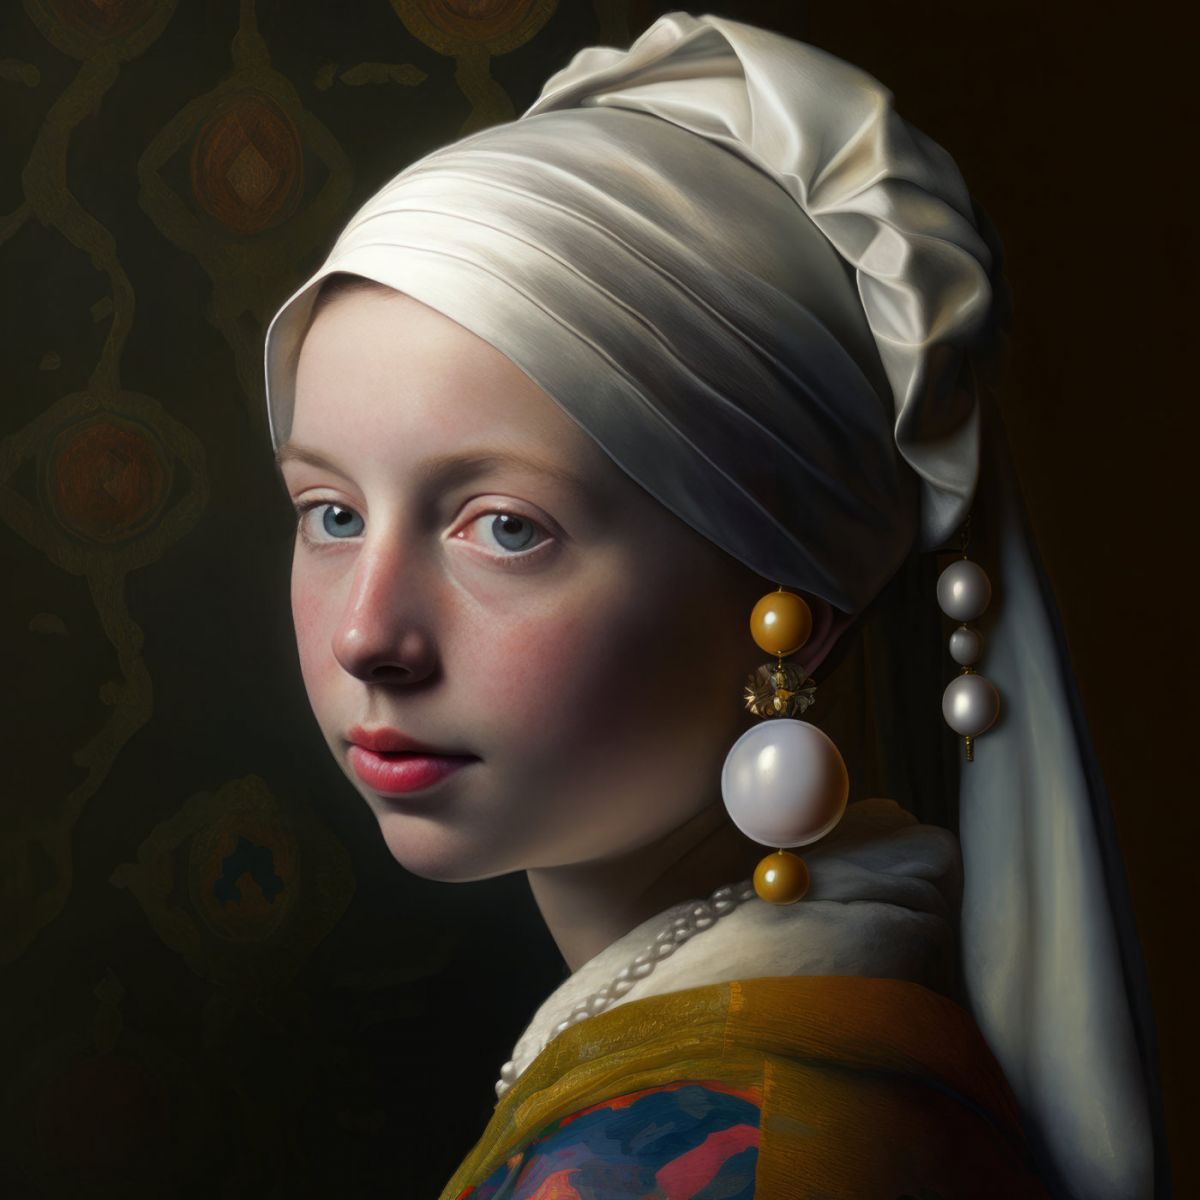 Girl with the pearl earrings